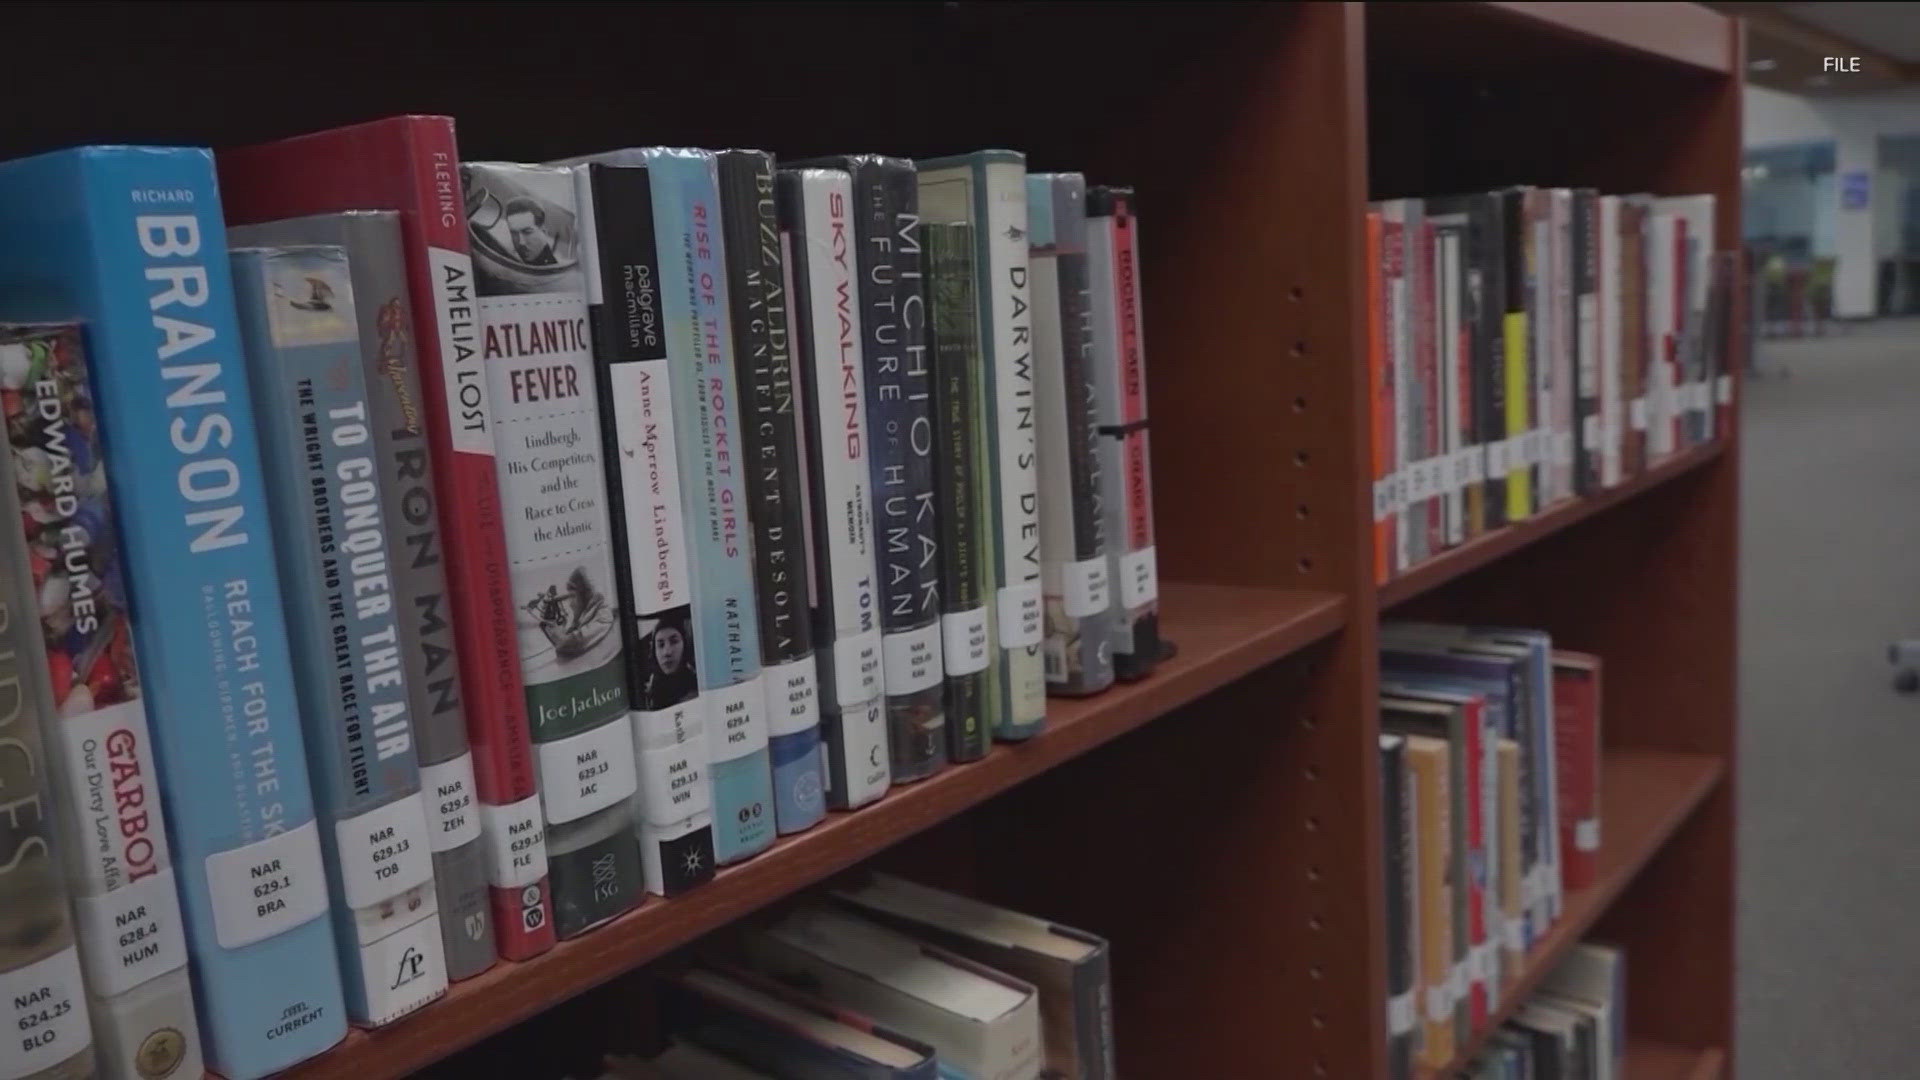 Leander ISD has been at the center of book ban controversies in the past.